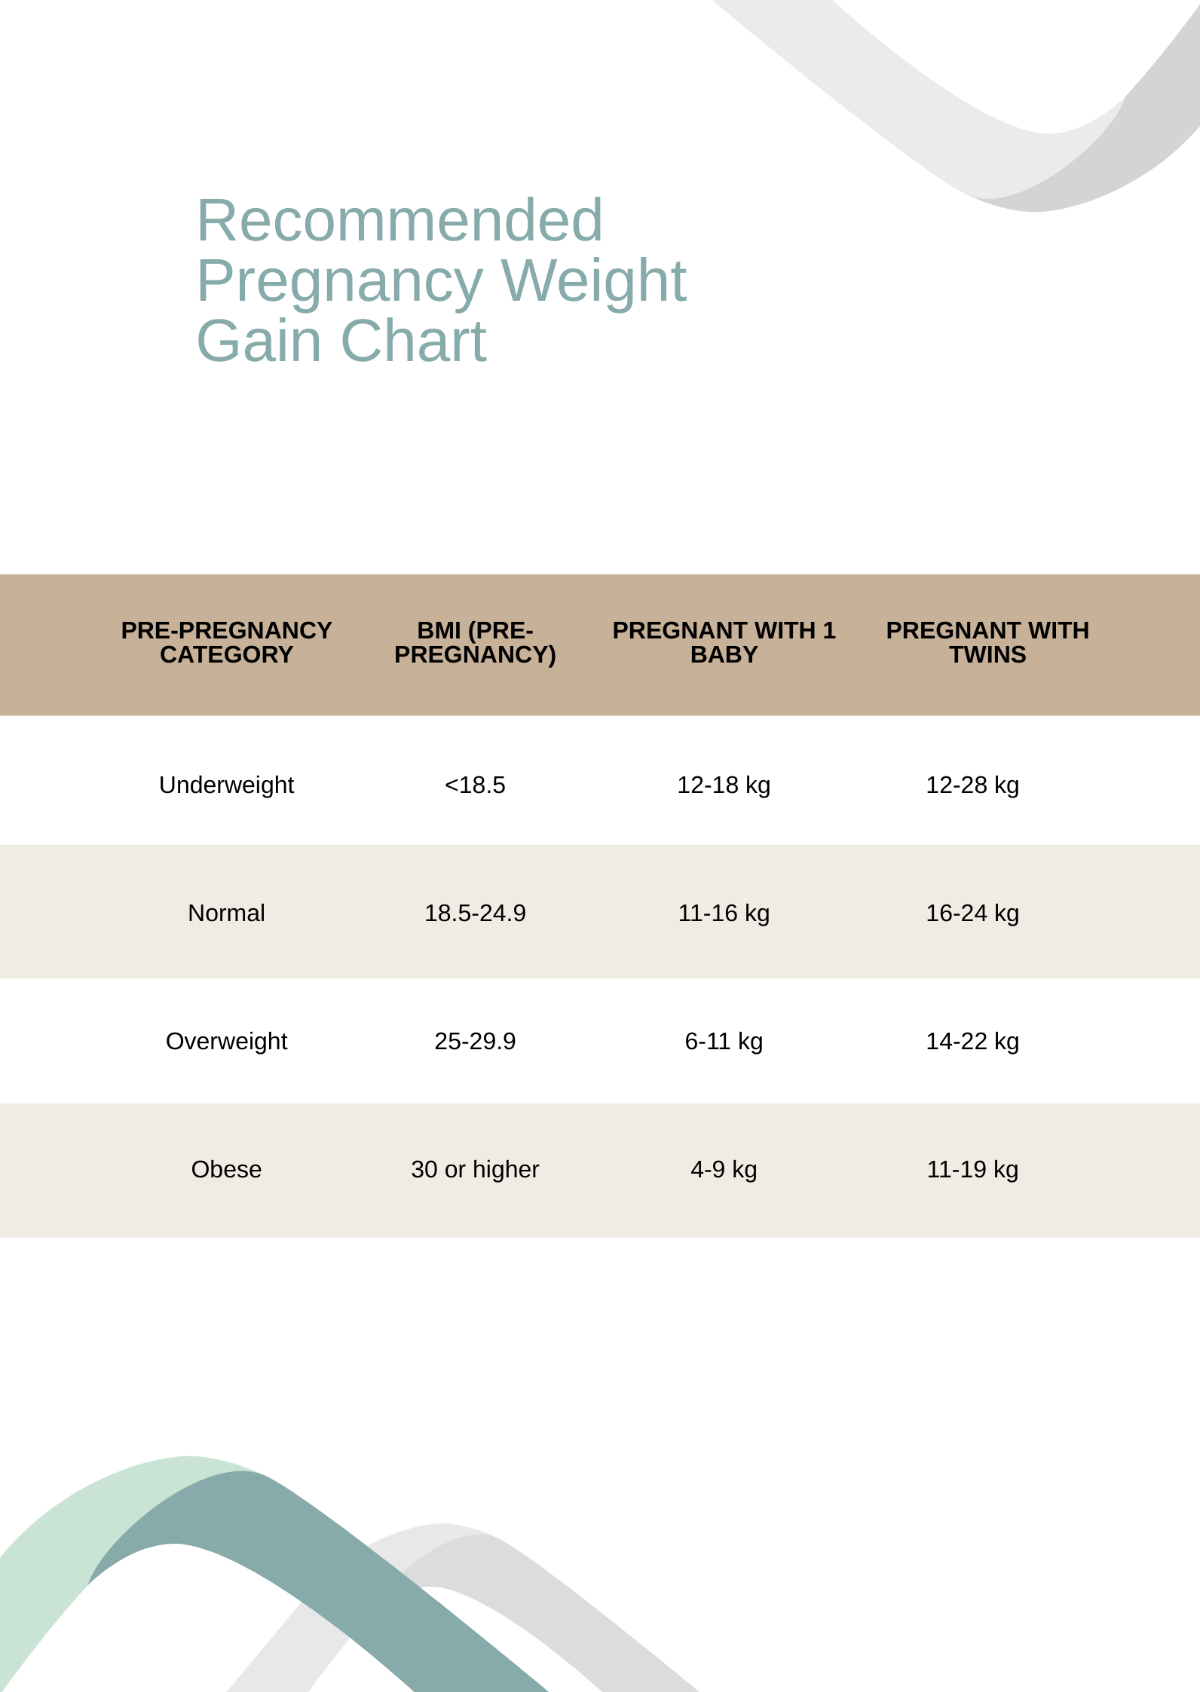 Recommended Pregnancy Weight Gain Chart